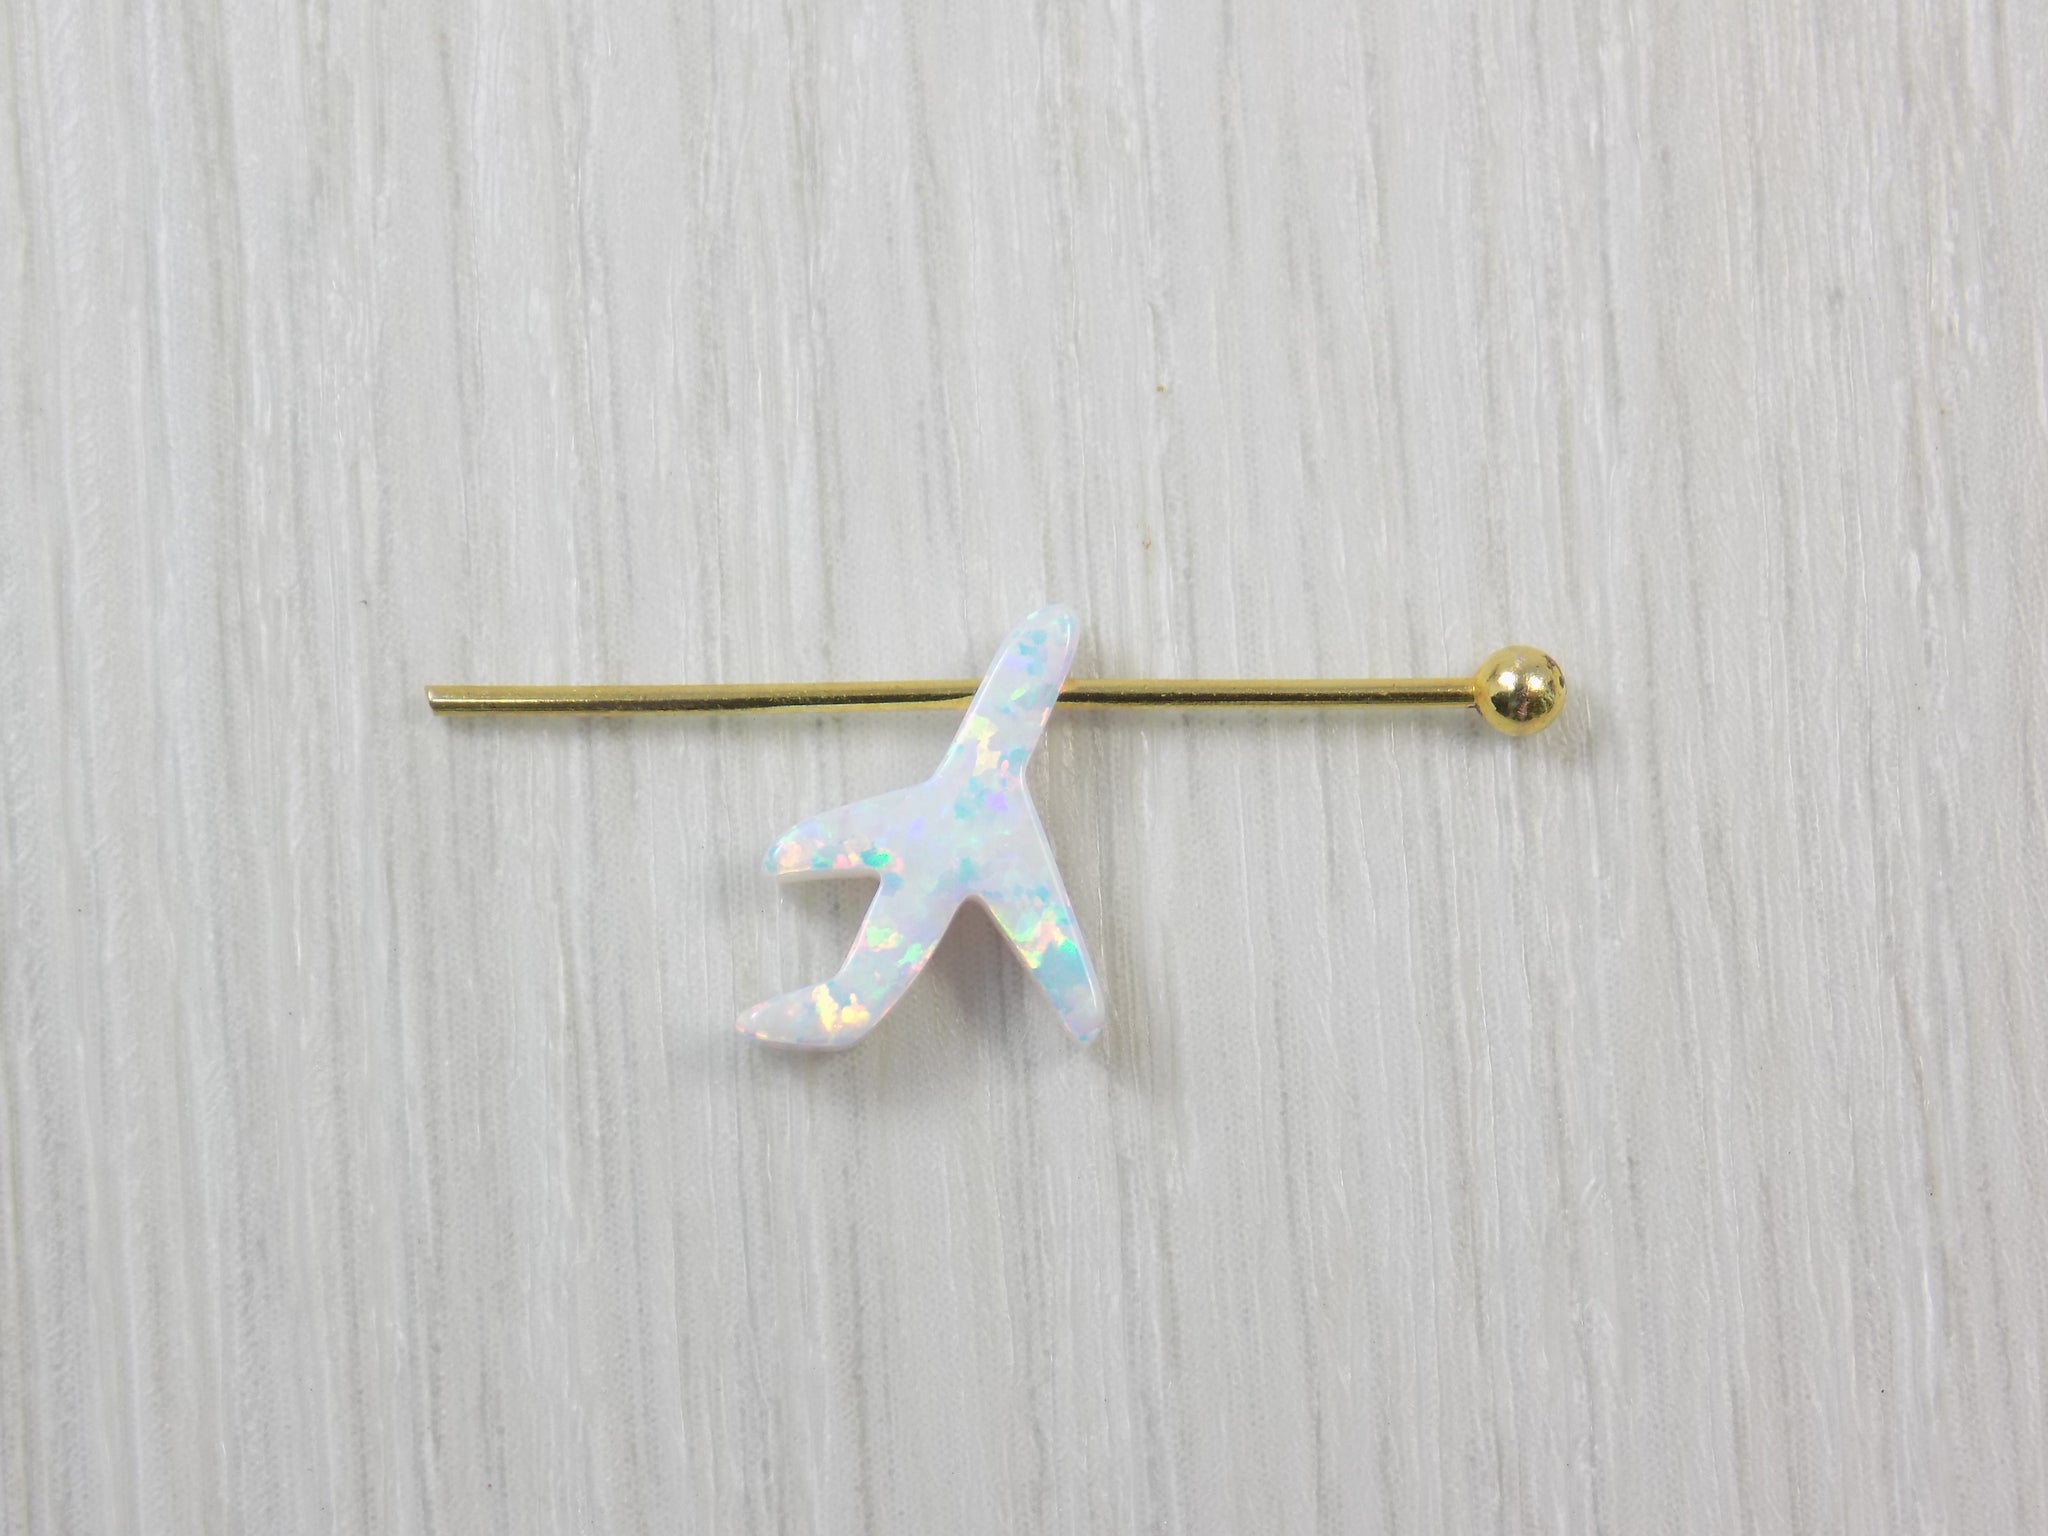 Tiny Opal Jet Plane Charm Size 12.5mmx8.6mm Authentic Lab-created Opal 